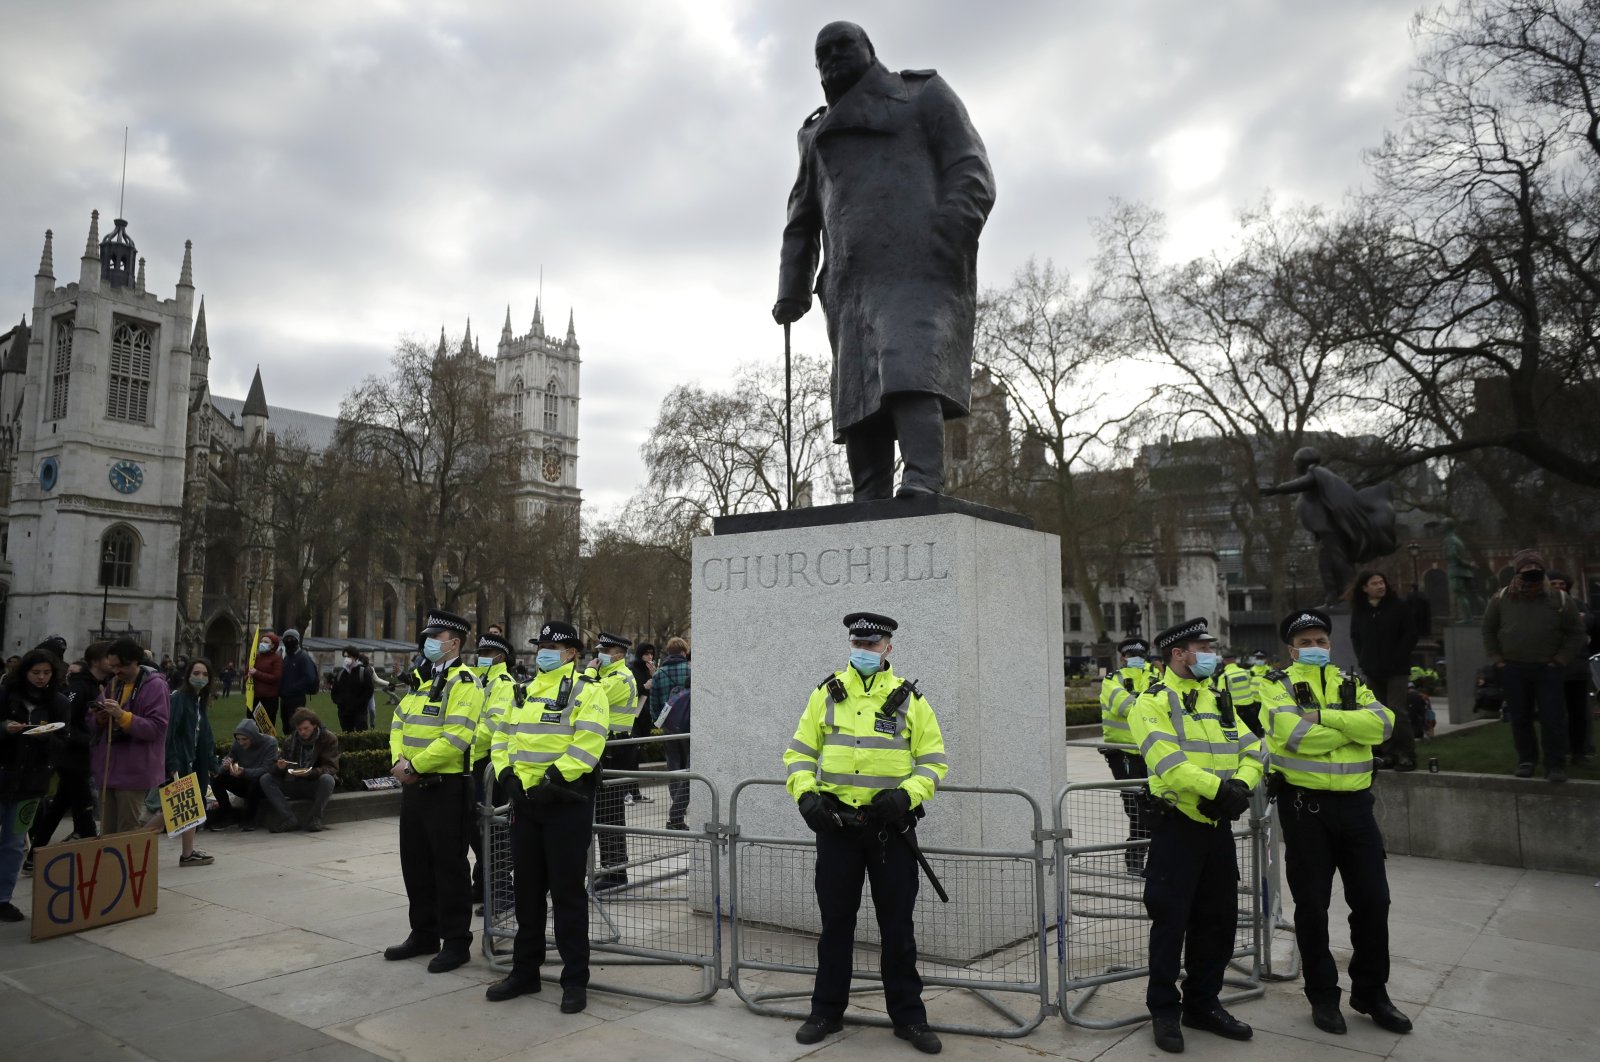 Police stand guard around the statue of wartime prime minister Winston Churchill in Parliament Square during a "Kill the Bill" protest in London, April 3, 2021.  (AP Photo/Matt Dunham)